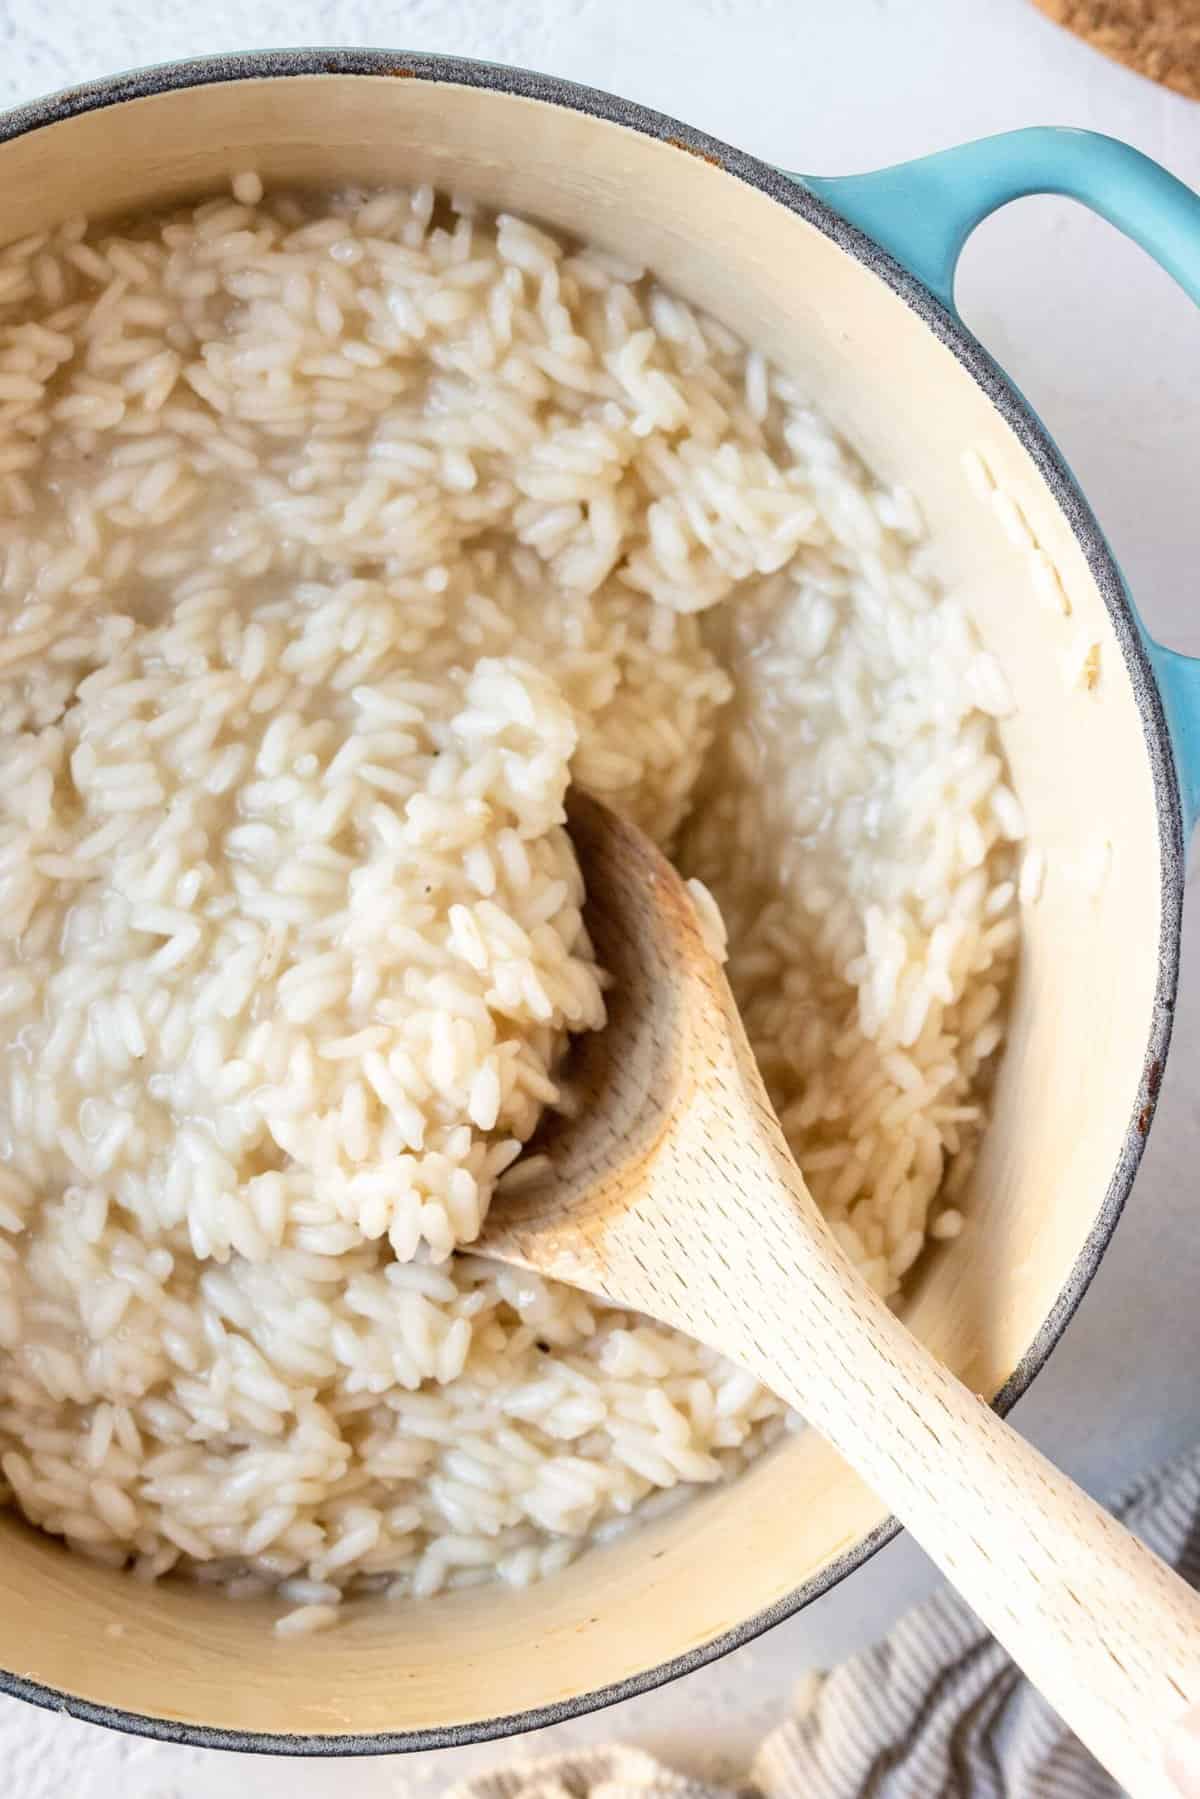 A close-up image of easy homemade risotto with a wooden spoon, ready to serve.